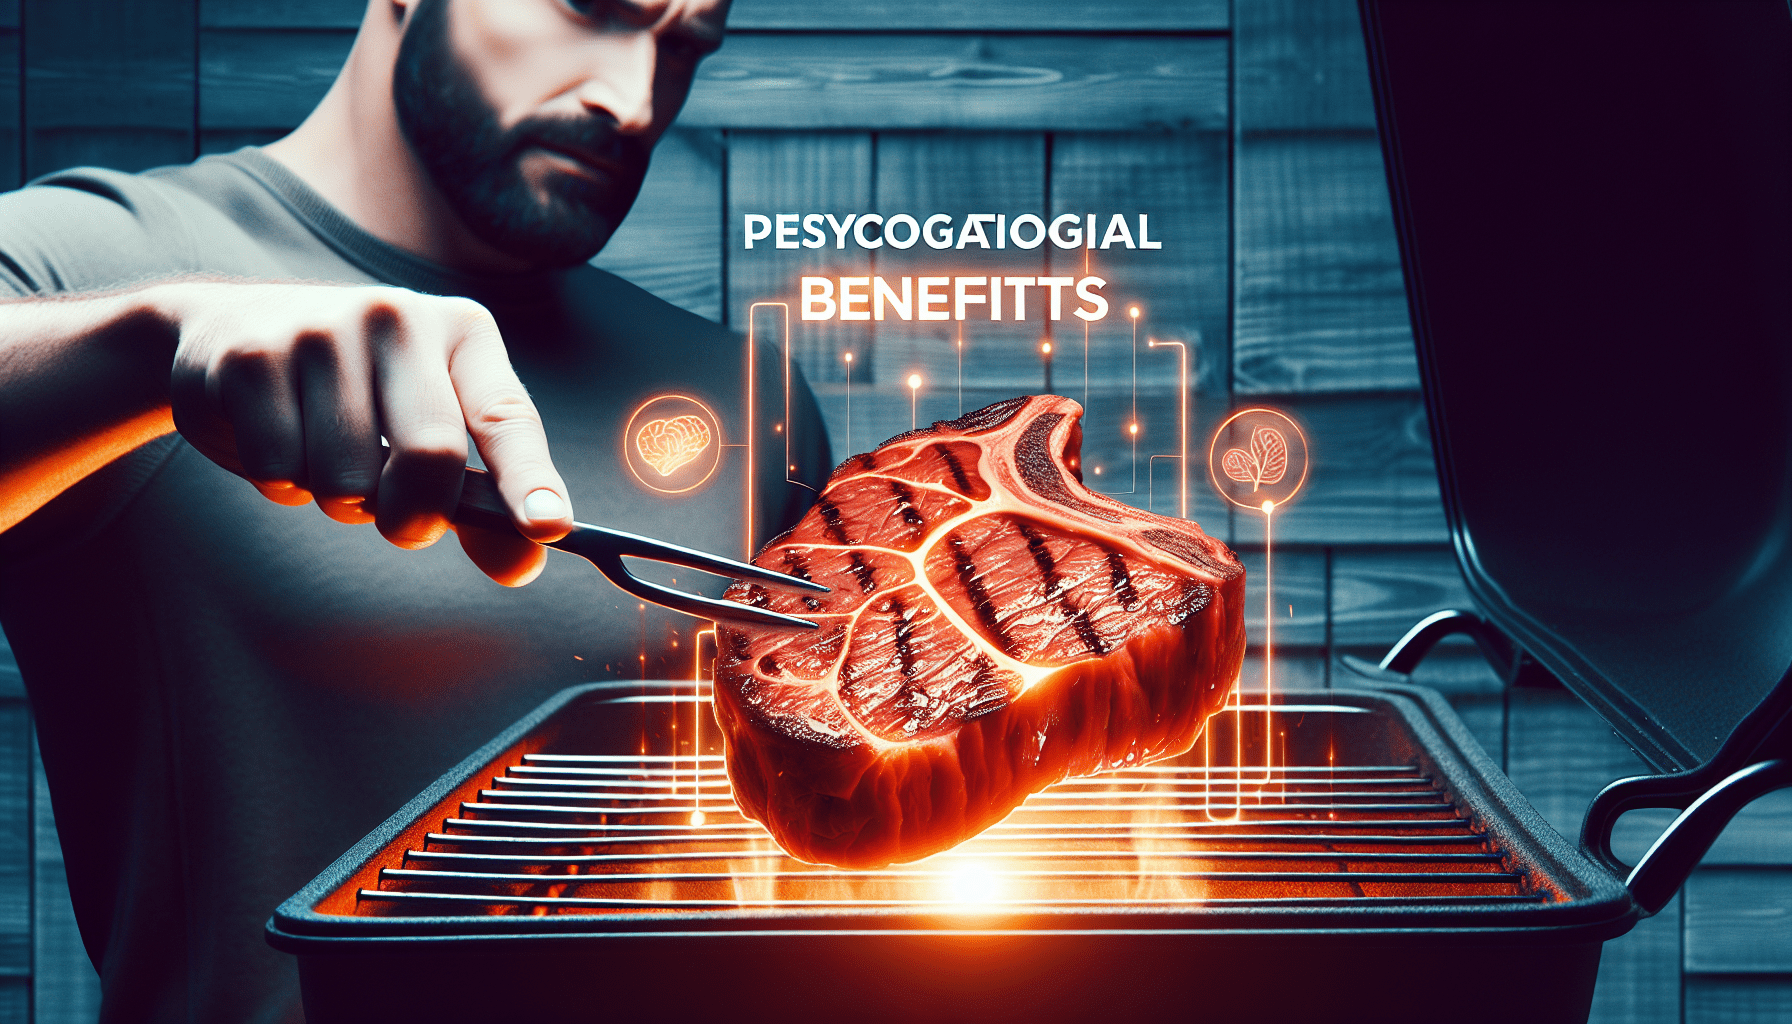 The Psychological Benefits of Following a Carnivore Diet